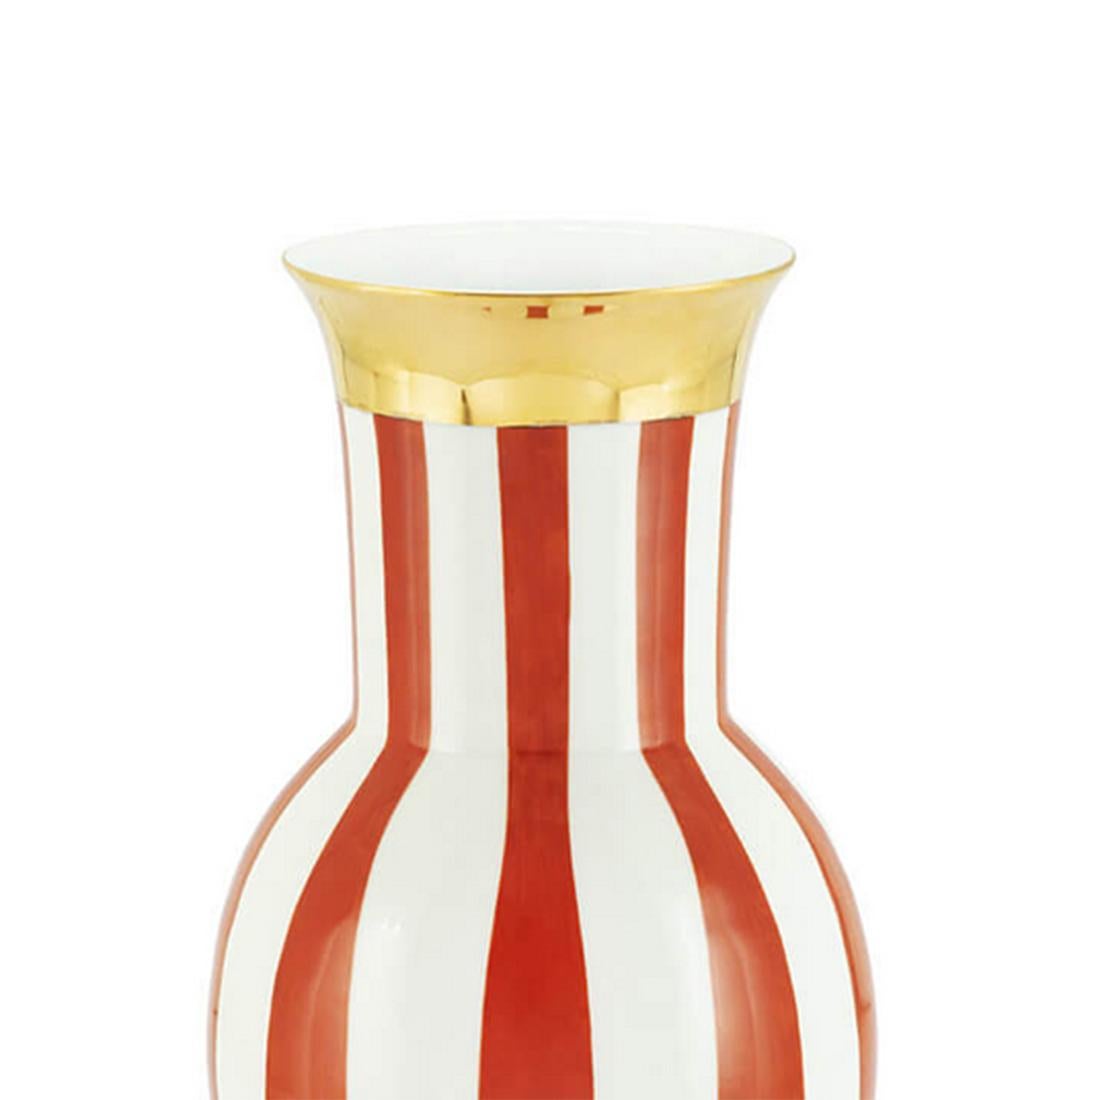 Vase golden red medium in porcelain
and with collar in gold finish.
Also available in large size on request.